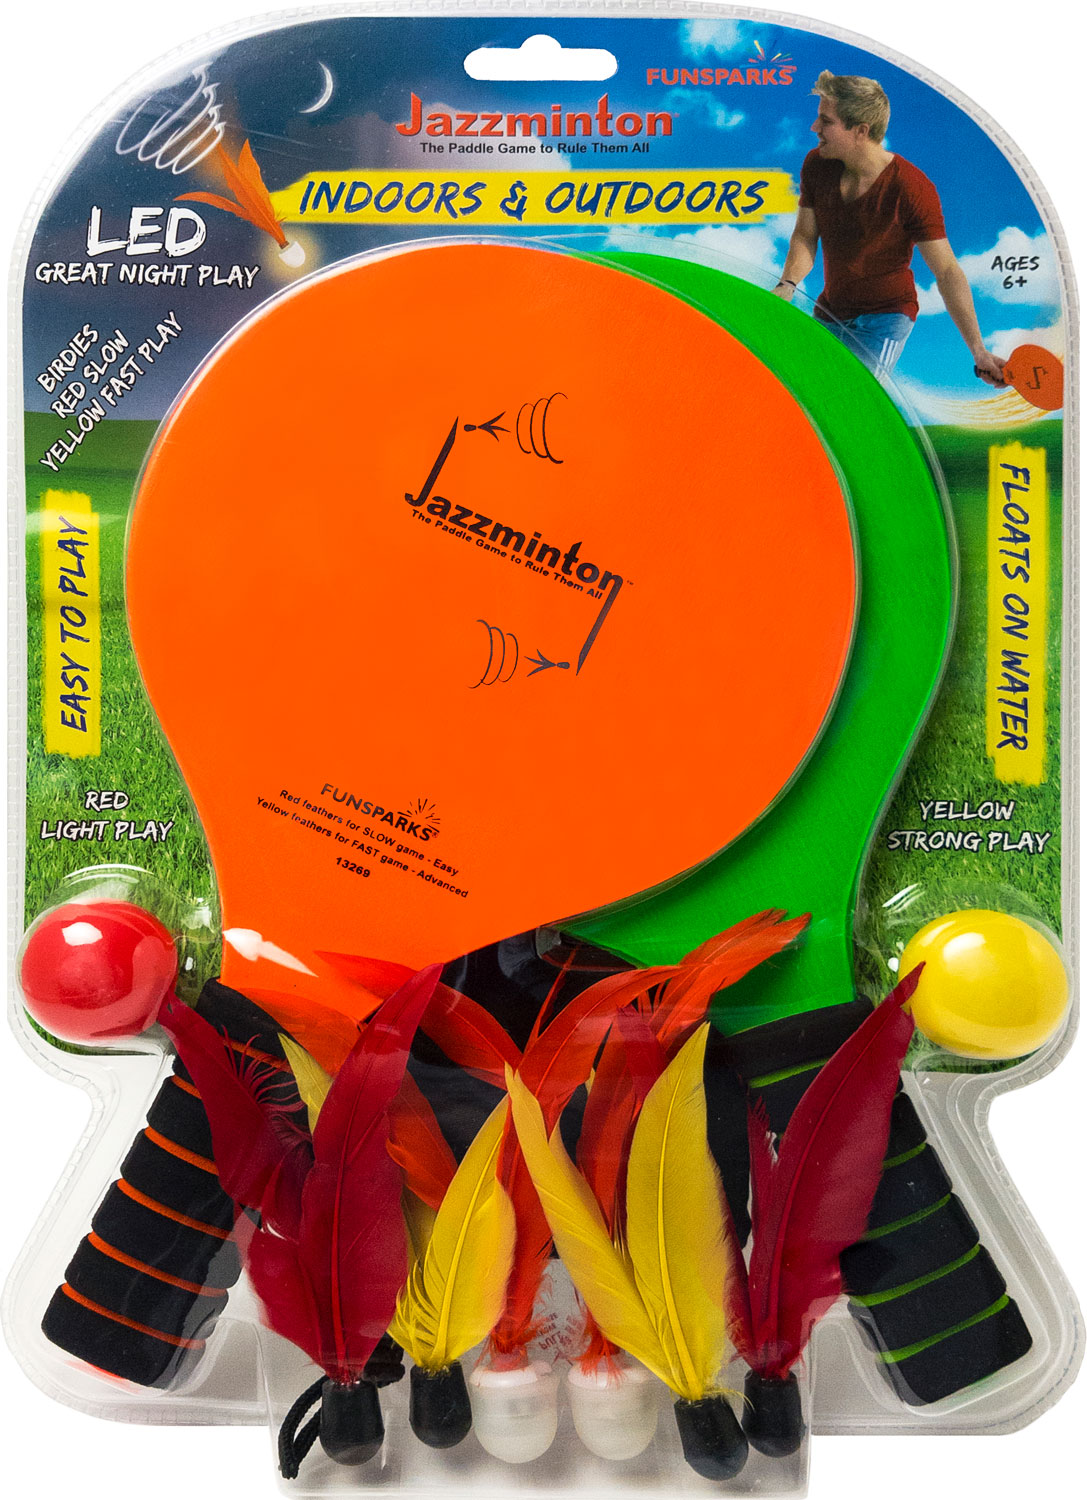 Jazzminton Deluxe LED 3 in 1 Paddle Ball Game Indoor Outdoor Kids Teens Adults for sale online